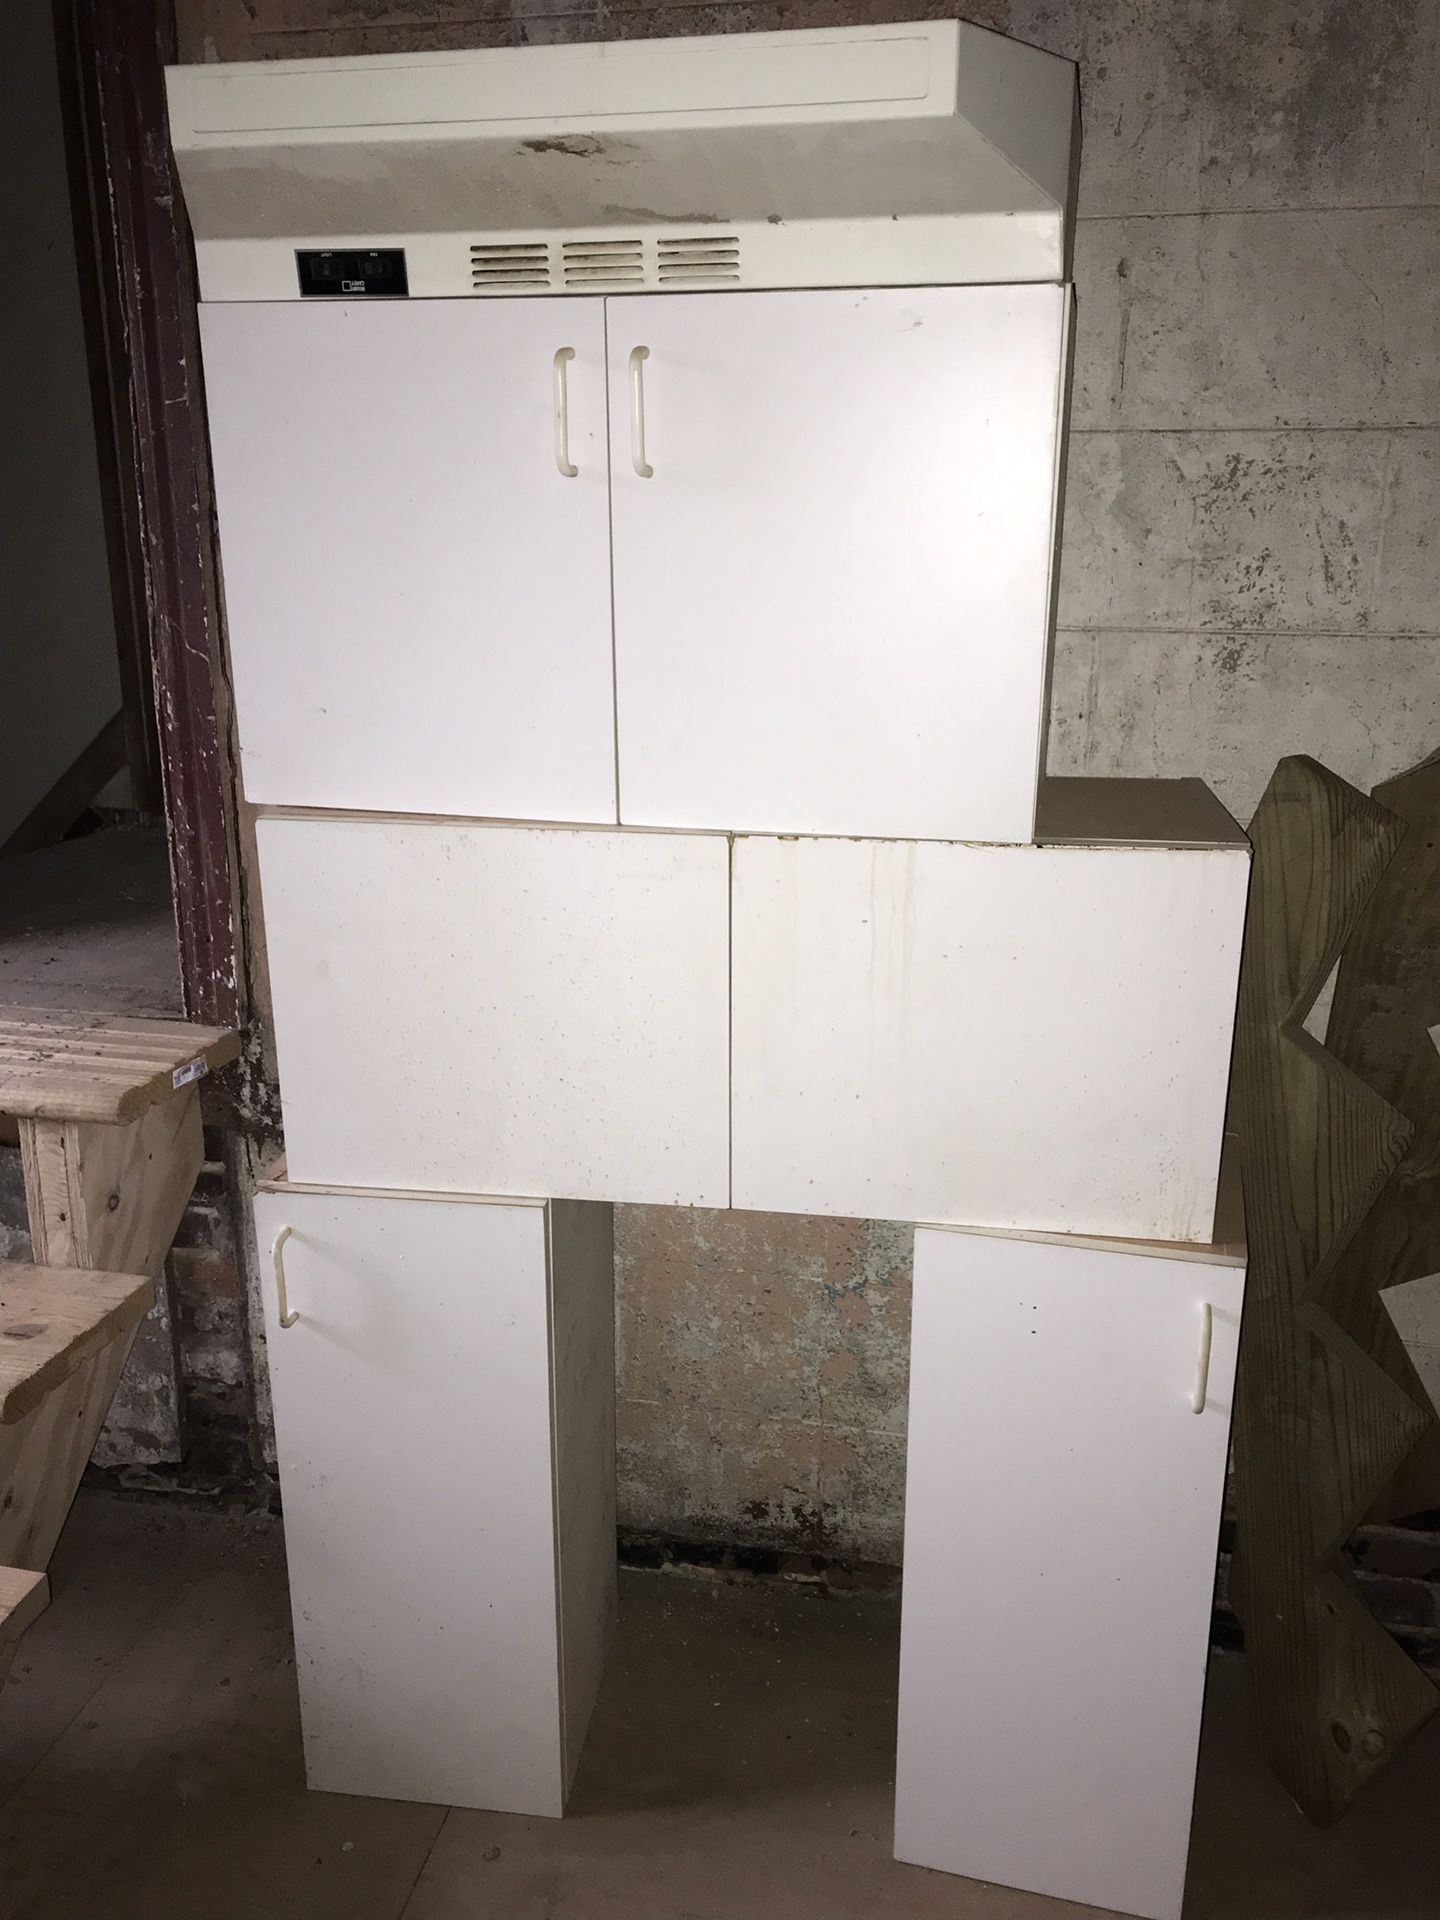 Used cabinets and exhaust removed in good condition